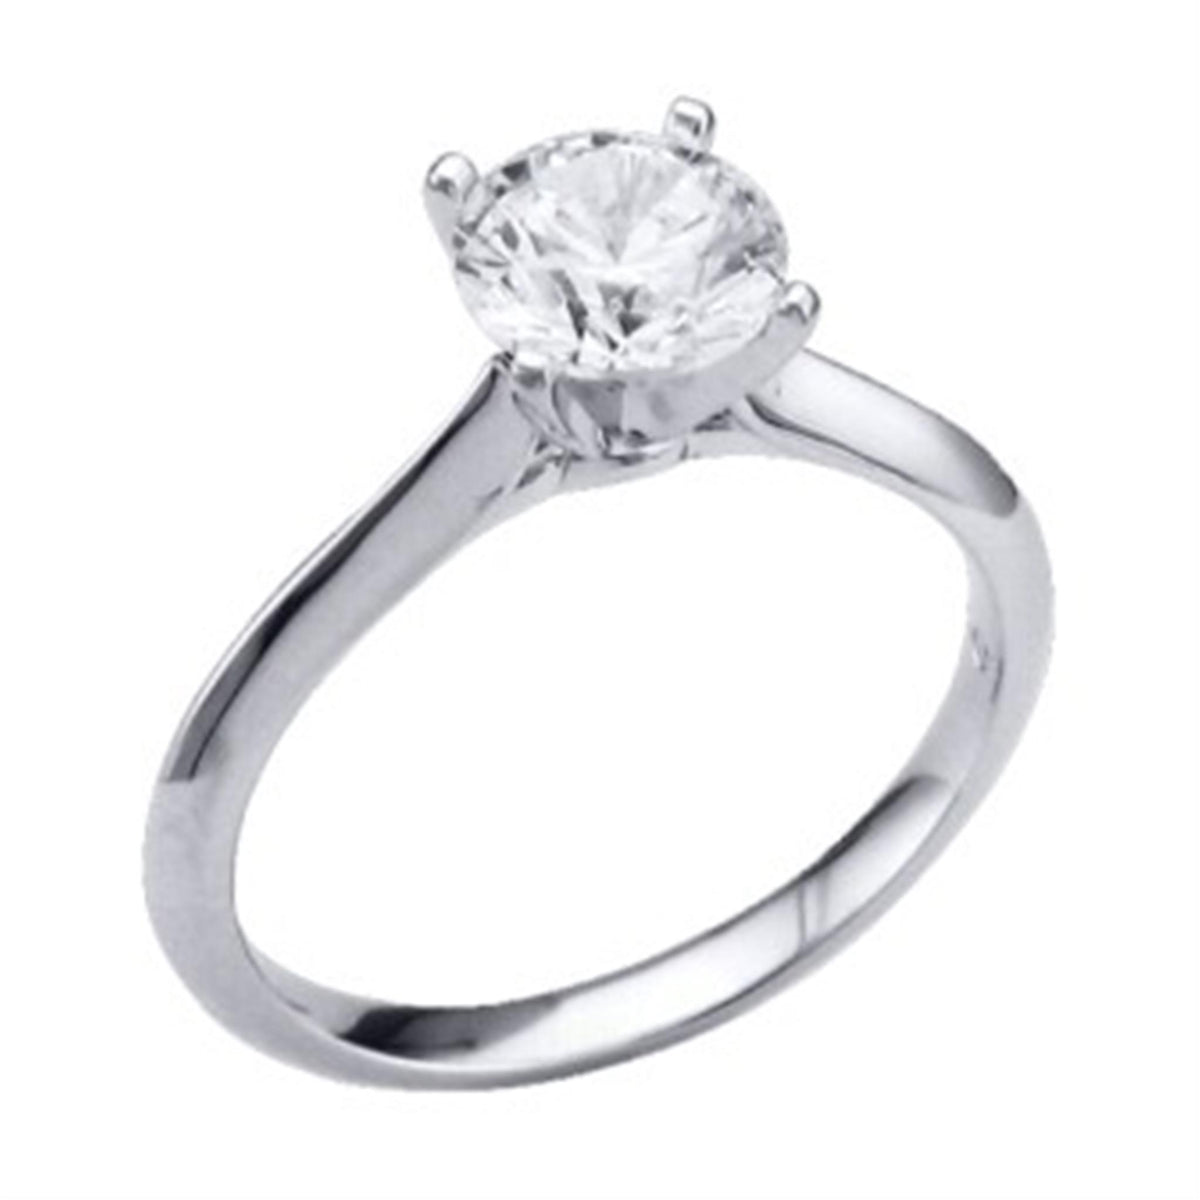 2mm Petite Knife-Edge Solitaire Ring